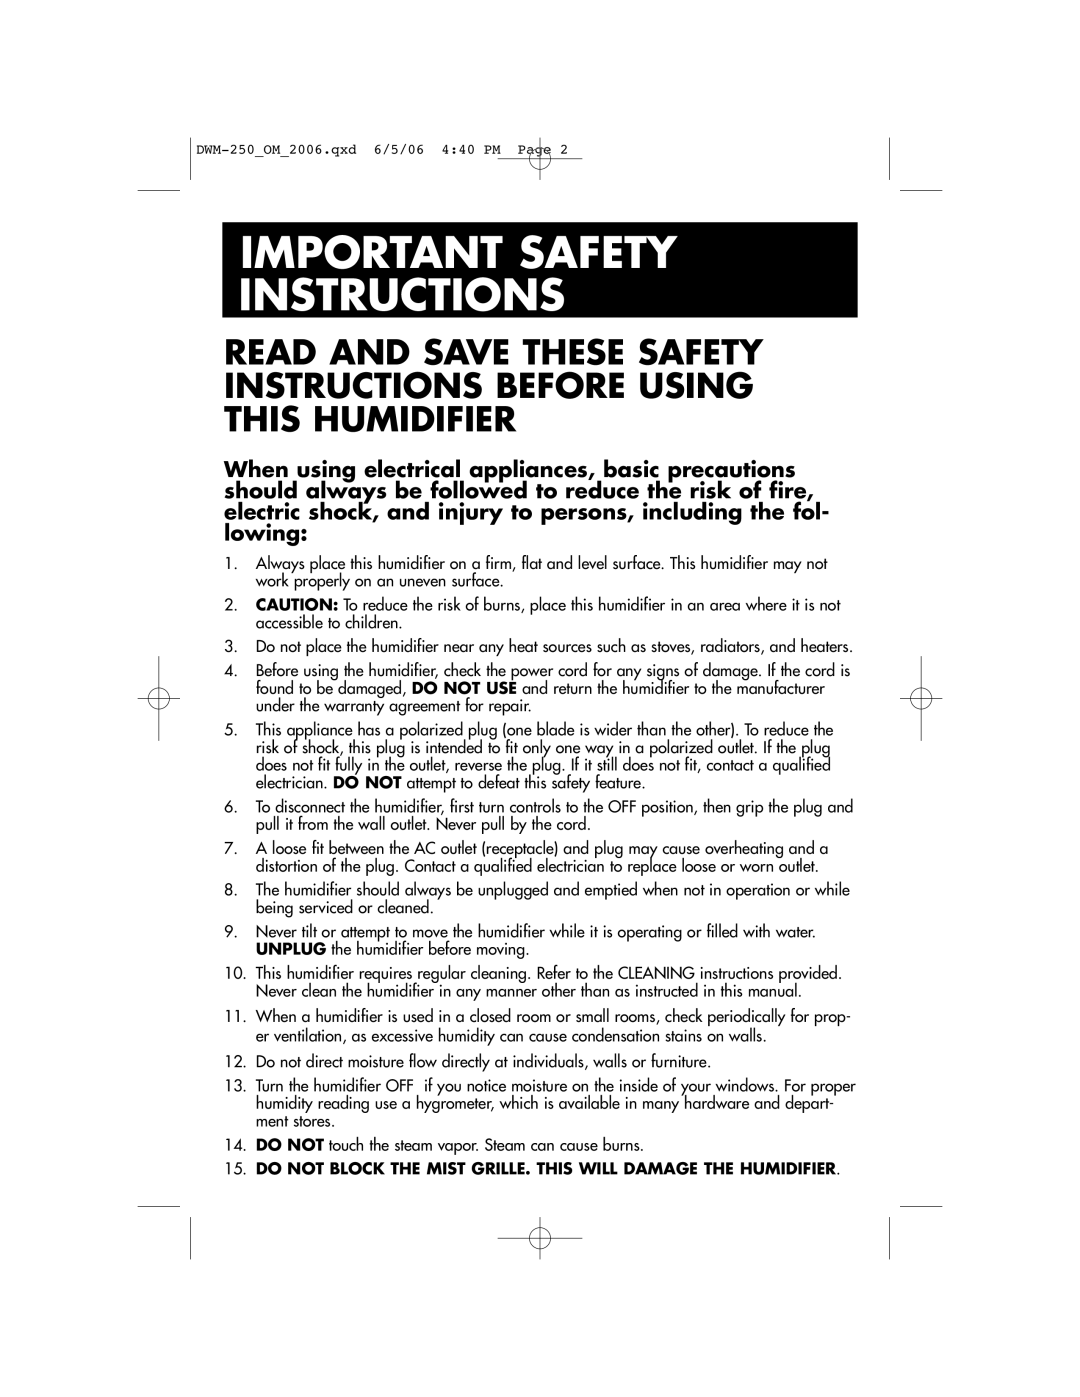 Duracraft DWM-250 Important Safety Instructions, Read And Save These Safety Instructions Before Using This Humidifier 